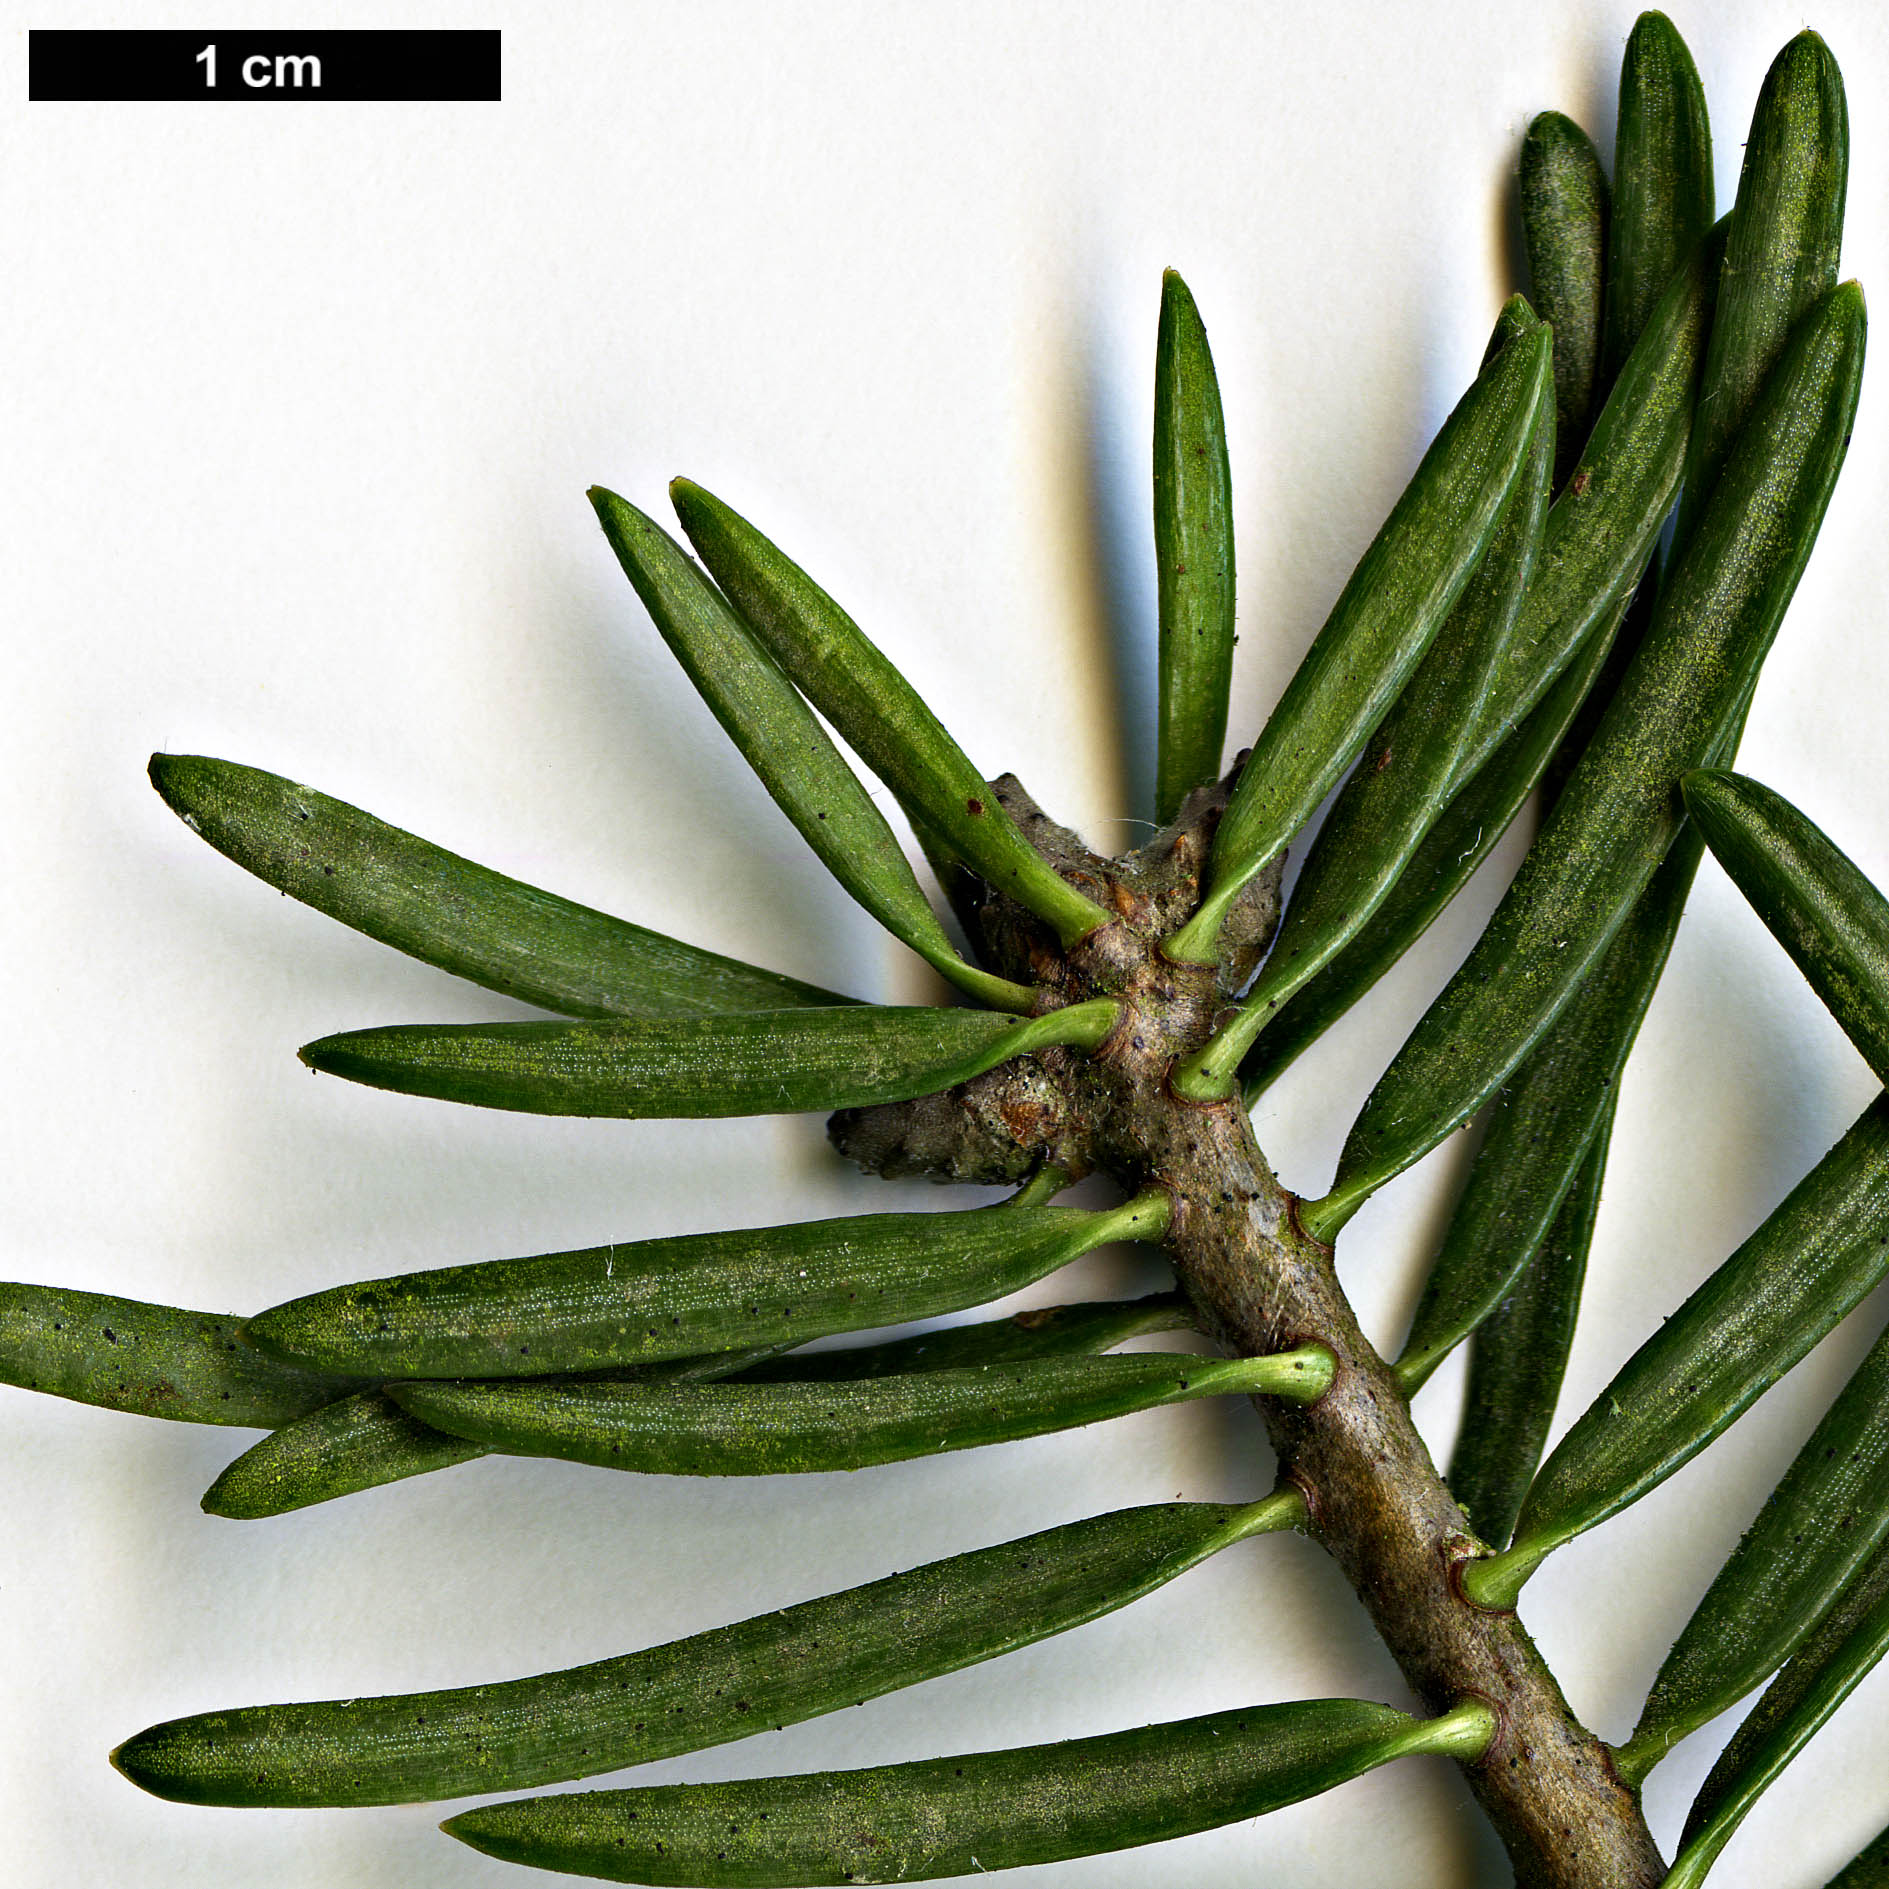 High resolution image: Family: Pinaceae - Genus: Abies - Taxon: concolor - SpeciesSub: var. lowiana